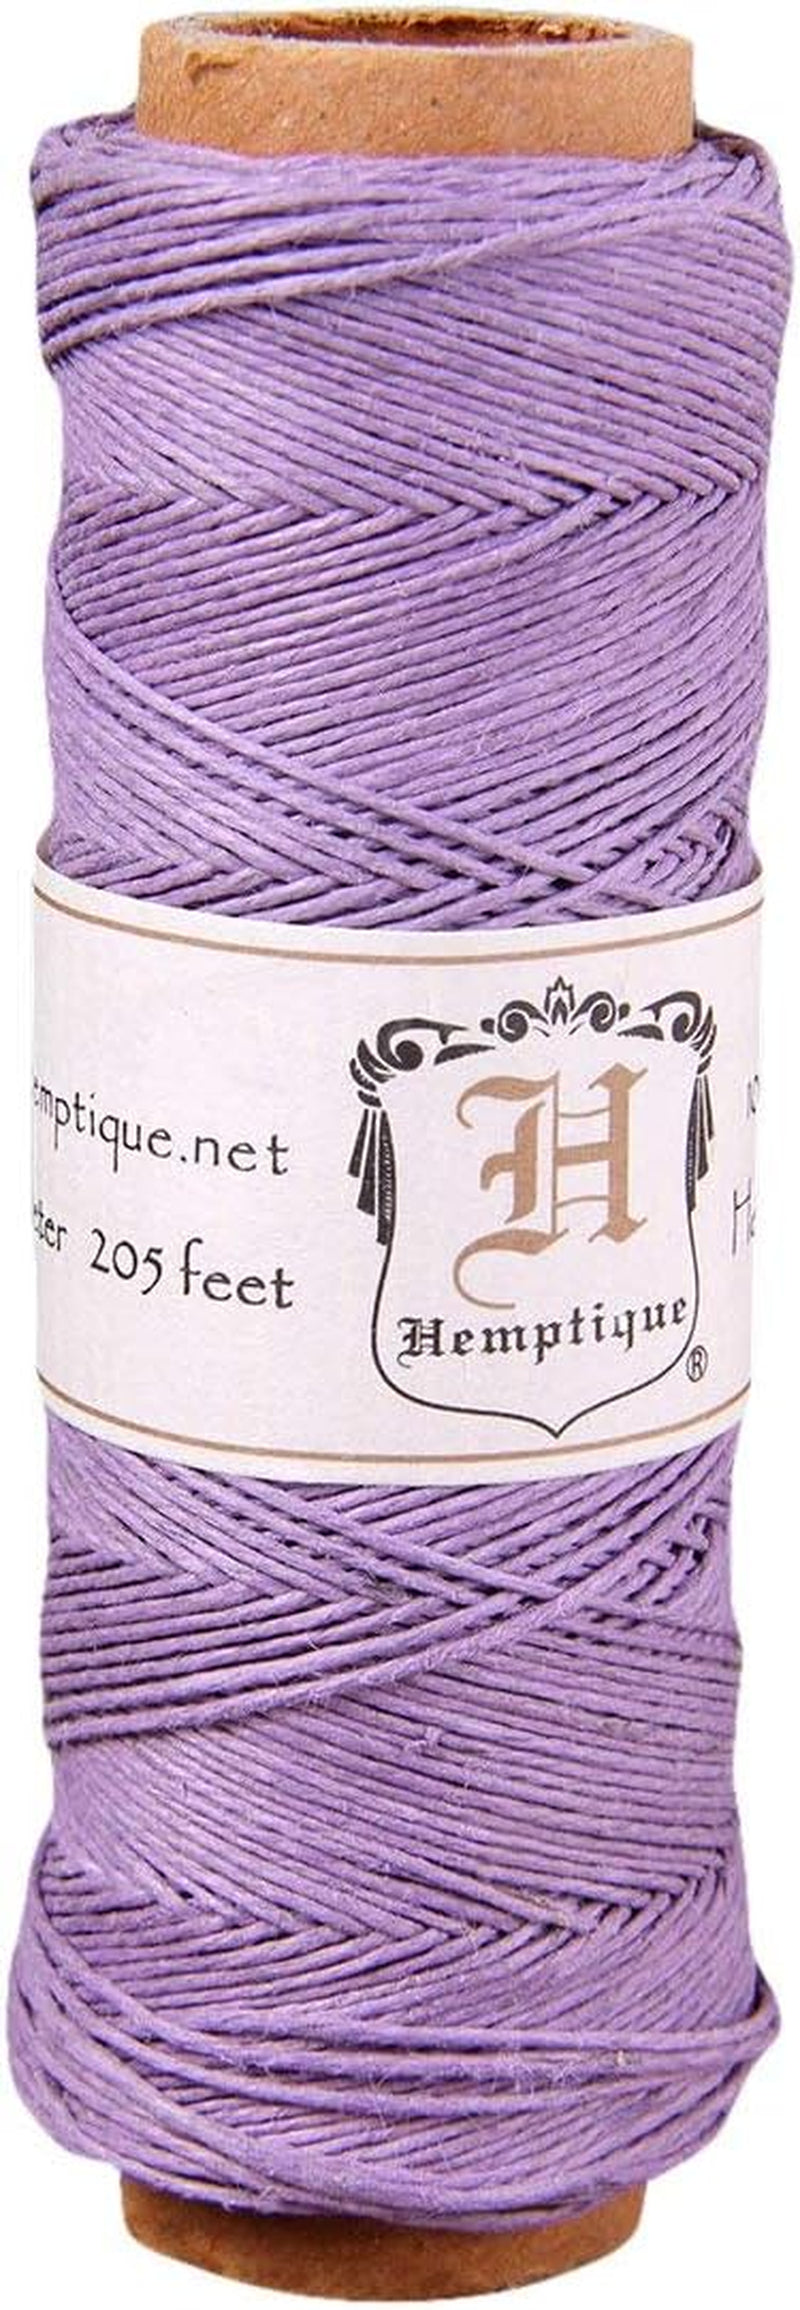 100% Natural Hemp Cord Single Spool - 205Ft ~ 62.5M Hemp String Spool - Crafters Number 1 Choice - .5Mm Cord Thread for Jewelry Making, Macramé, Scrapbooking, & More - Black